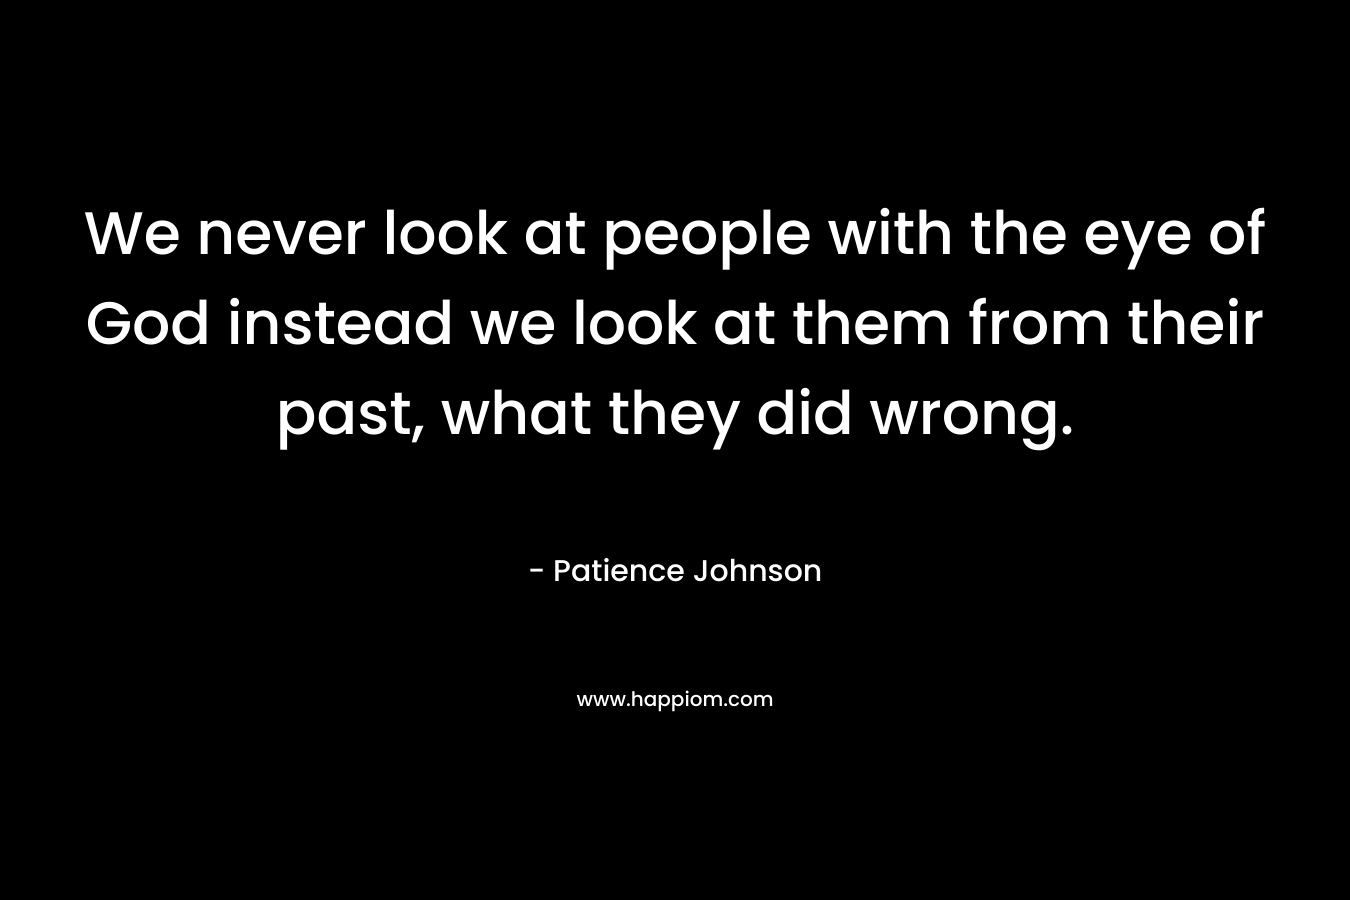 We never look at people with the eye of God instead we look at them from their past, what they did wrong. – Patience Johnson